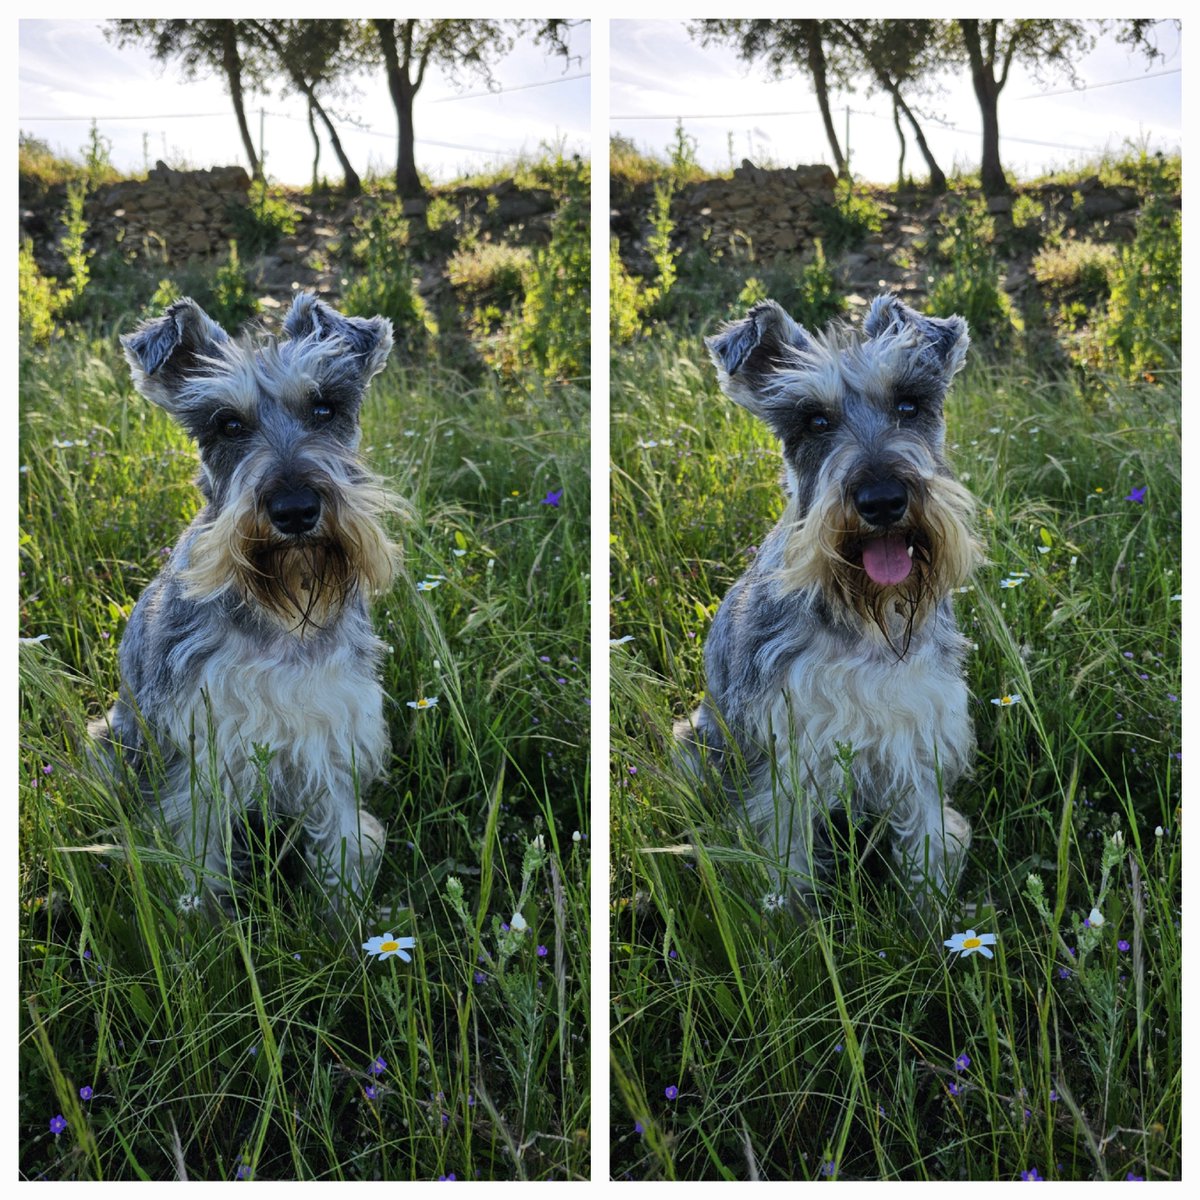 Morning frens, what is your mood today? #1 or #2? 😃 #SchnauzerGang #FridayFeeling #Happy